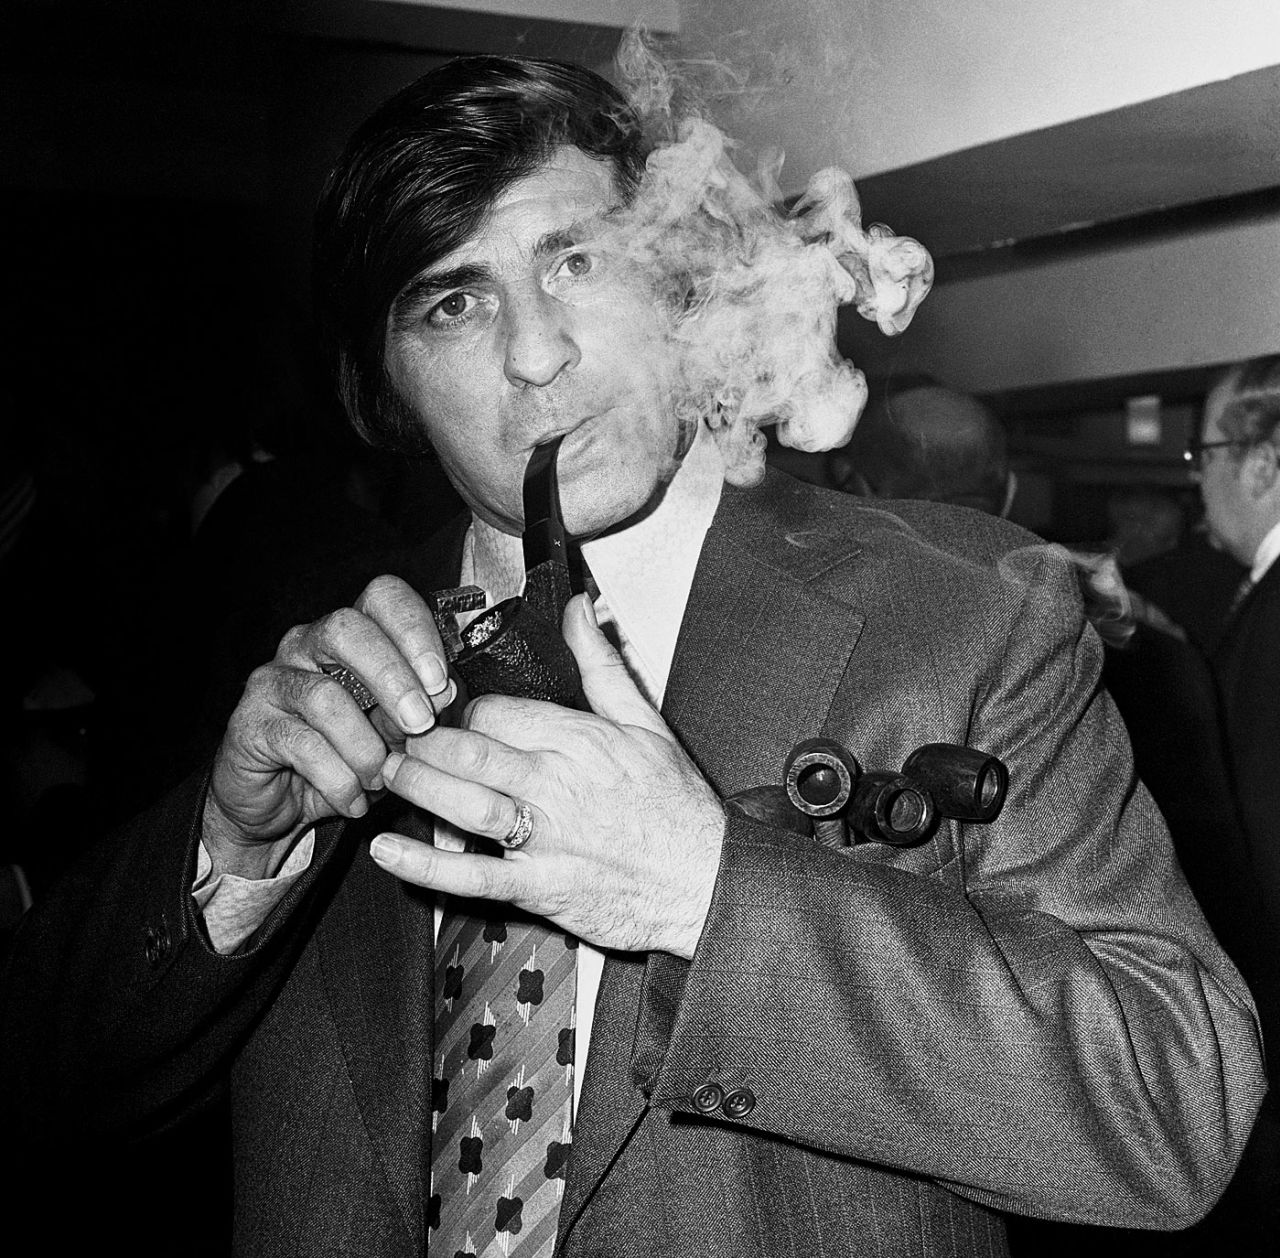 Fred Trueman was named Pipeman of the Year 1974, London, January 17, 1974